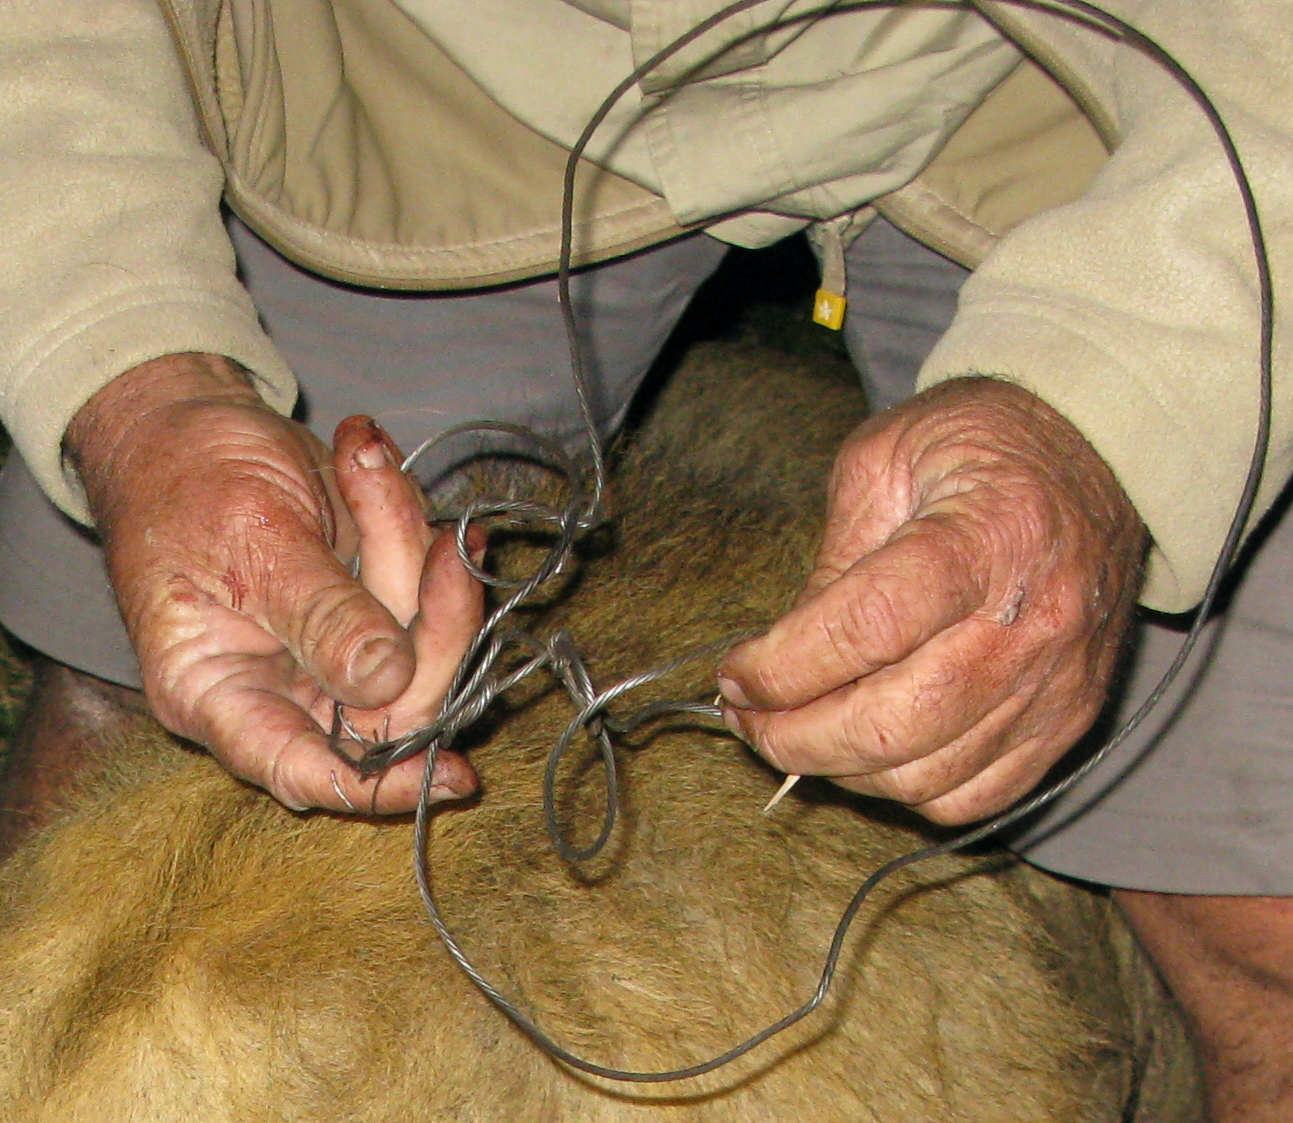 Image of a poacher's noose-like wire snare